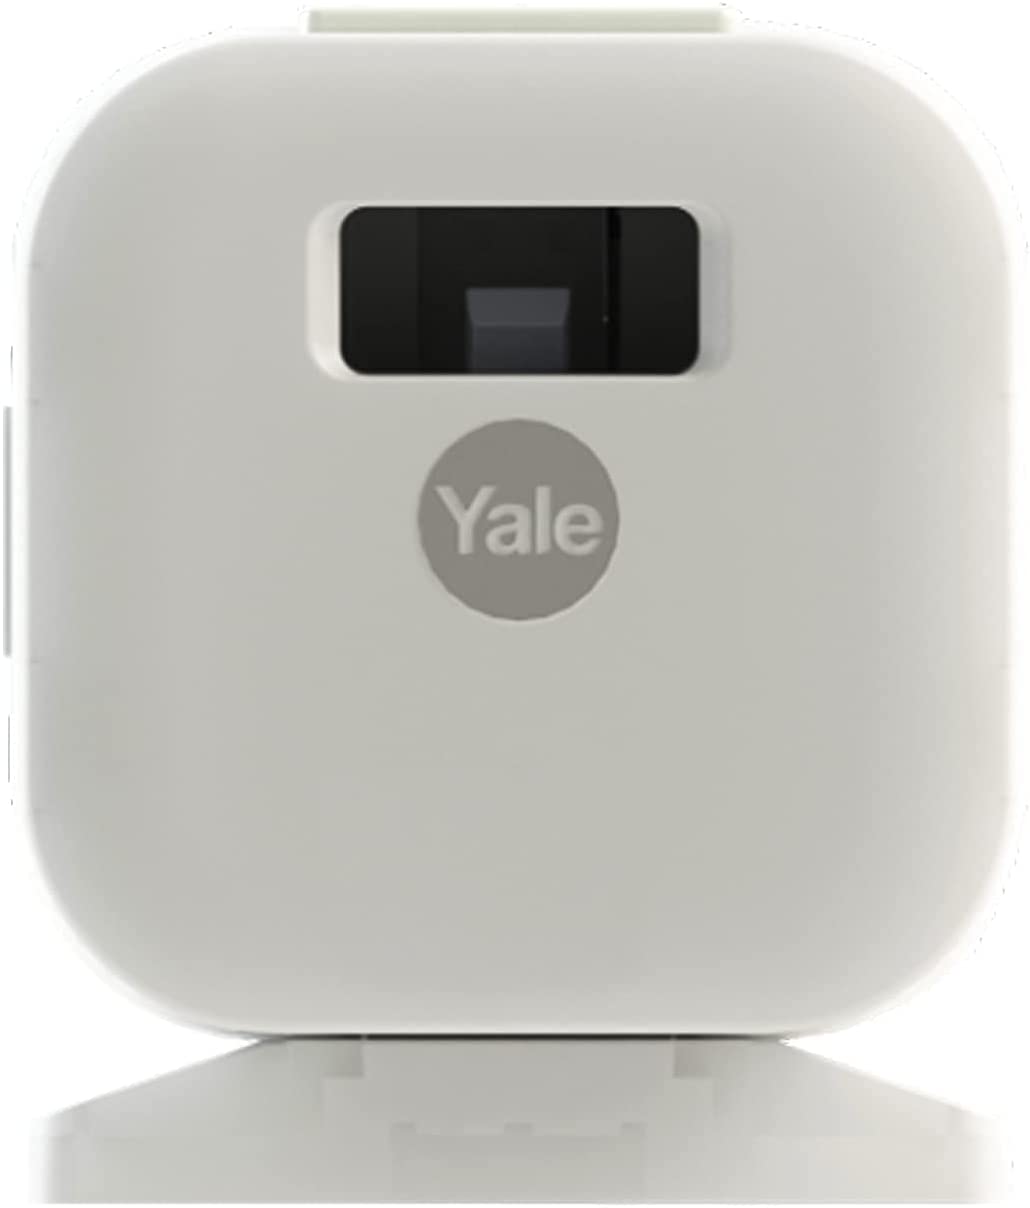 Secure your valuables with the Yale Smart Cabinet Lock with HomeKit support.